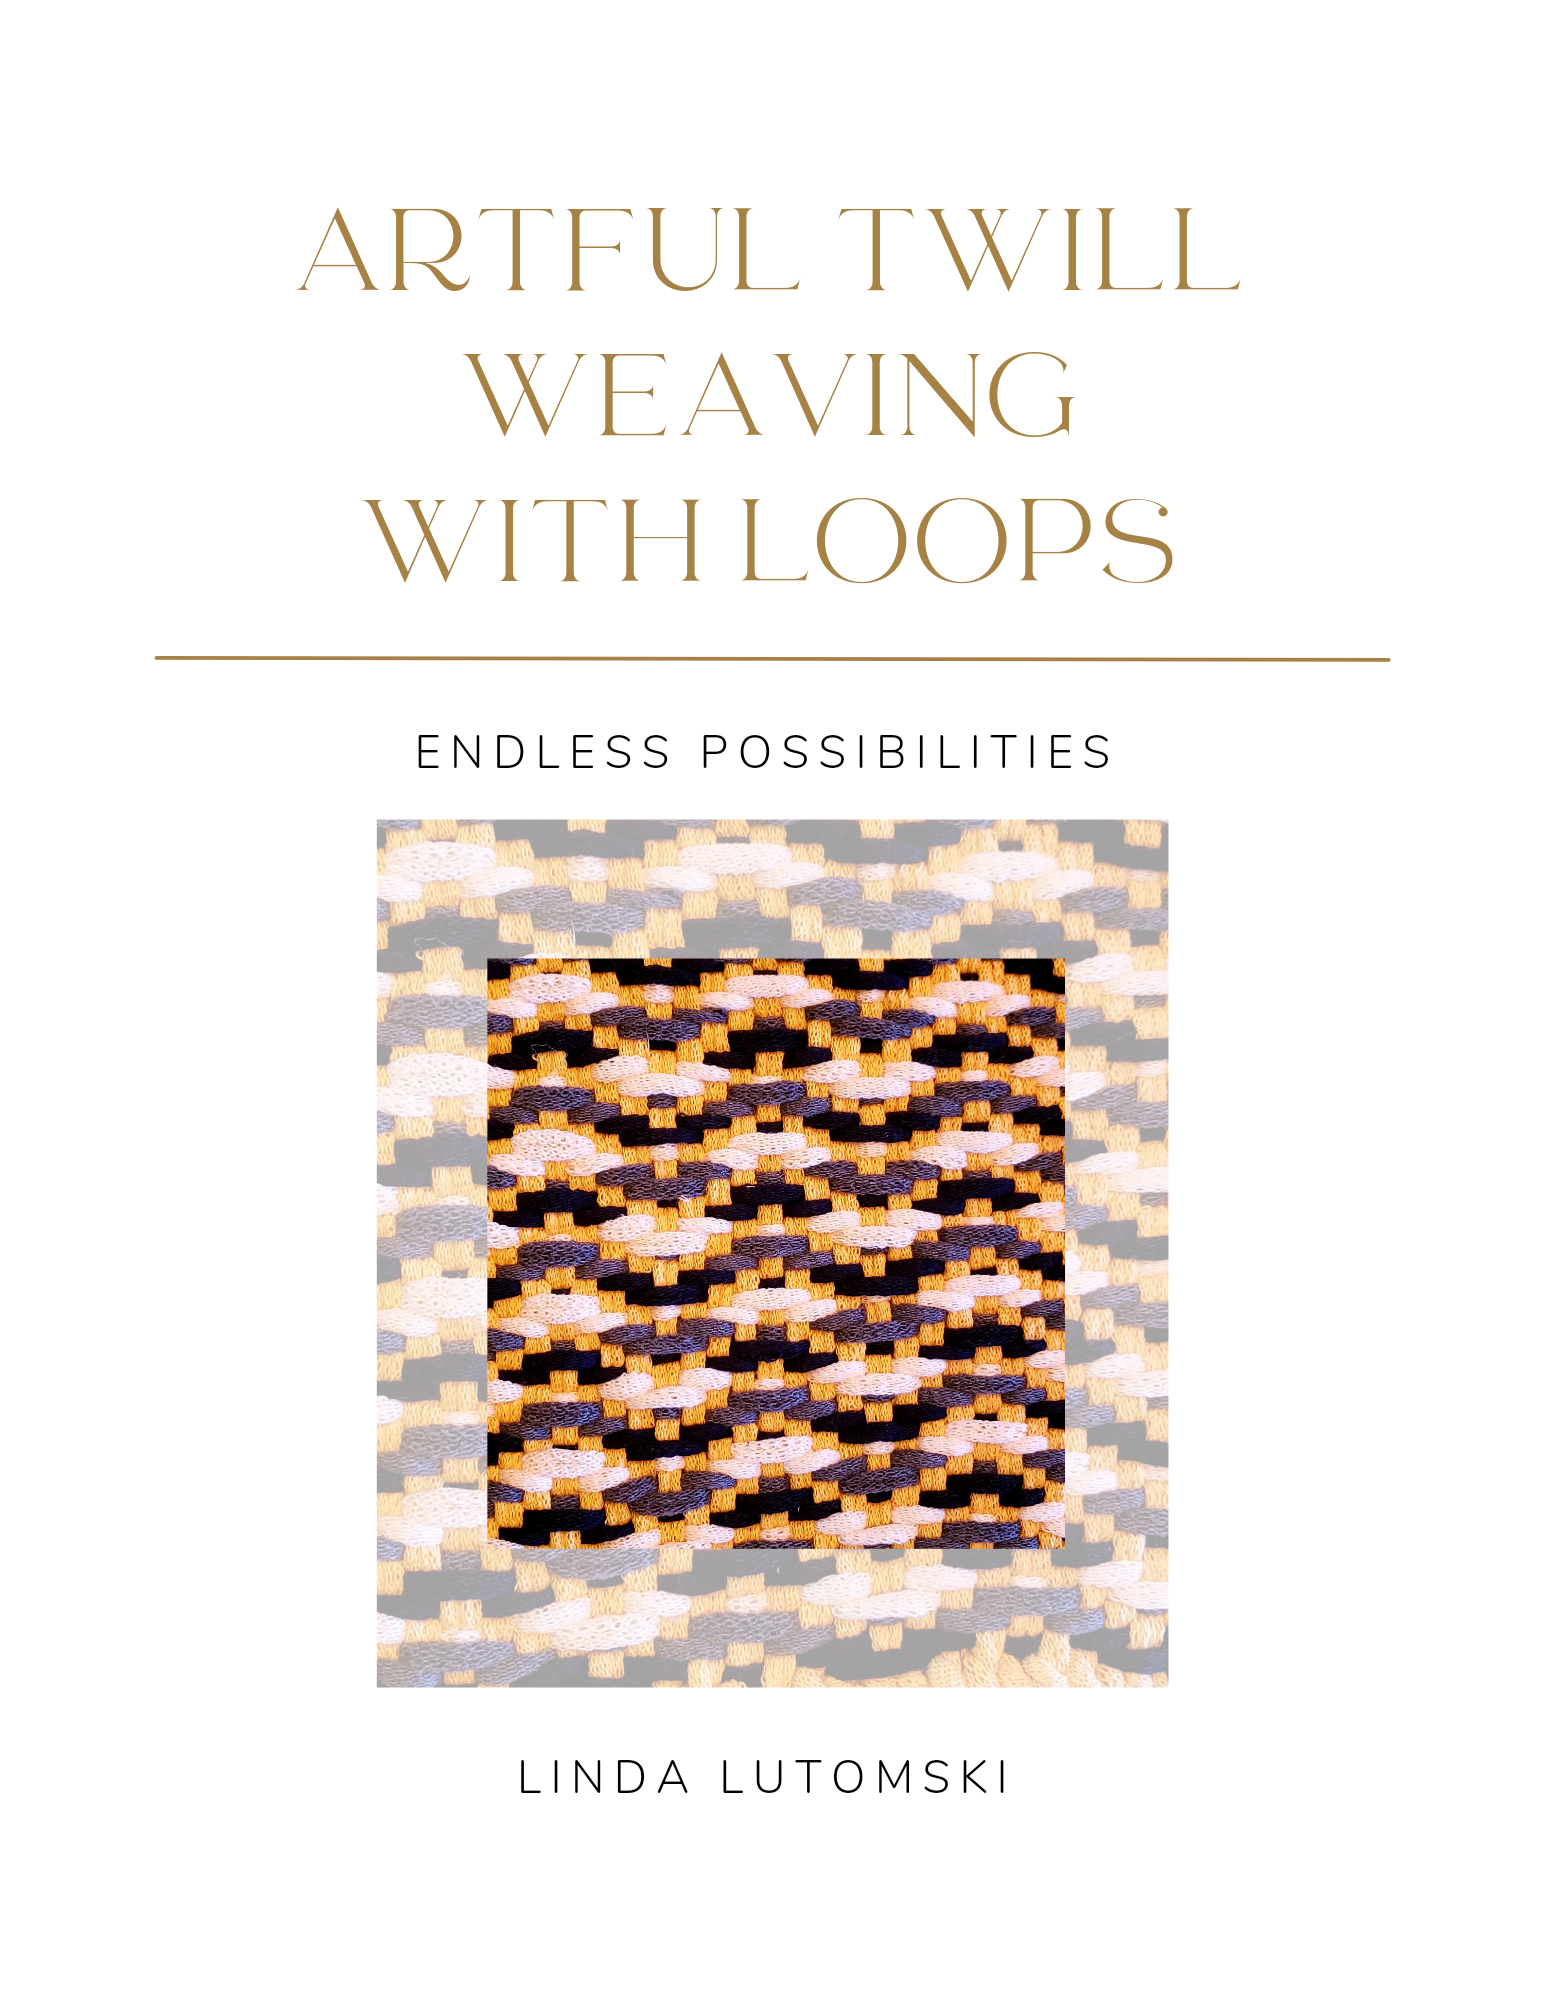 Artful Twill Weaving with Loops: Endless Possibilities by Linda Lutomski